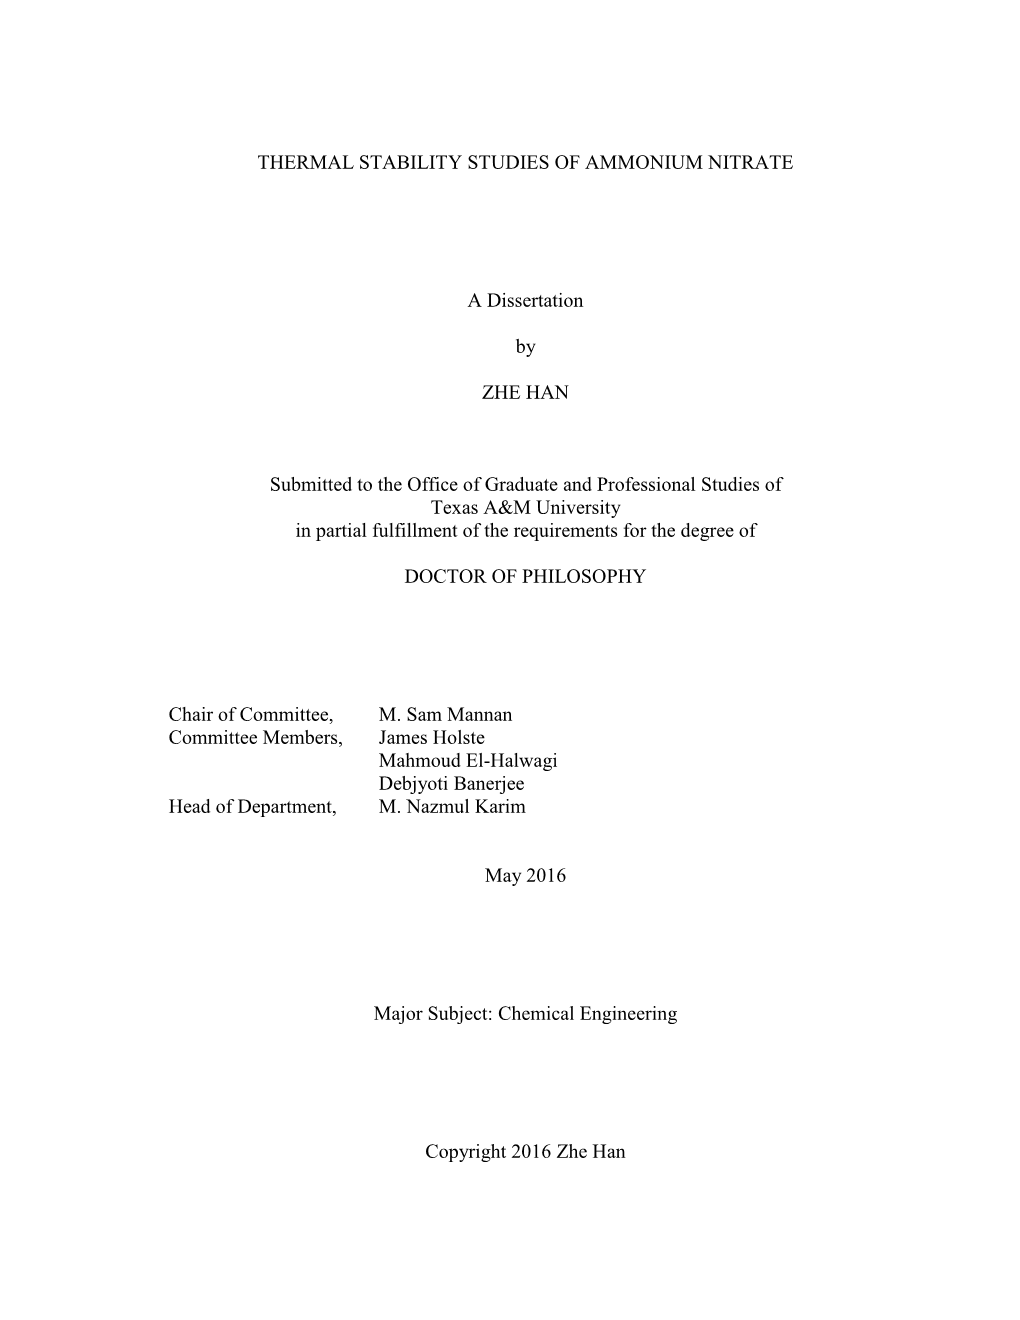 THERMAL STABILITY STUDIES of AMMONIUM NITRATE a Dissertation by ZHE HAN Submitted to the Office of Graduate and Professional St